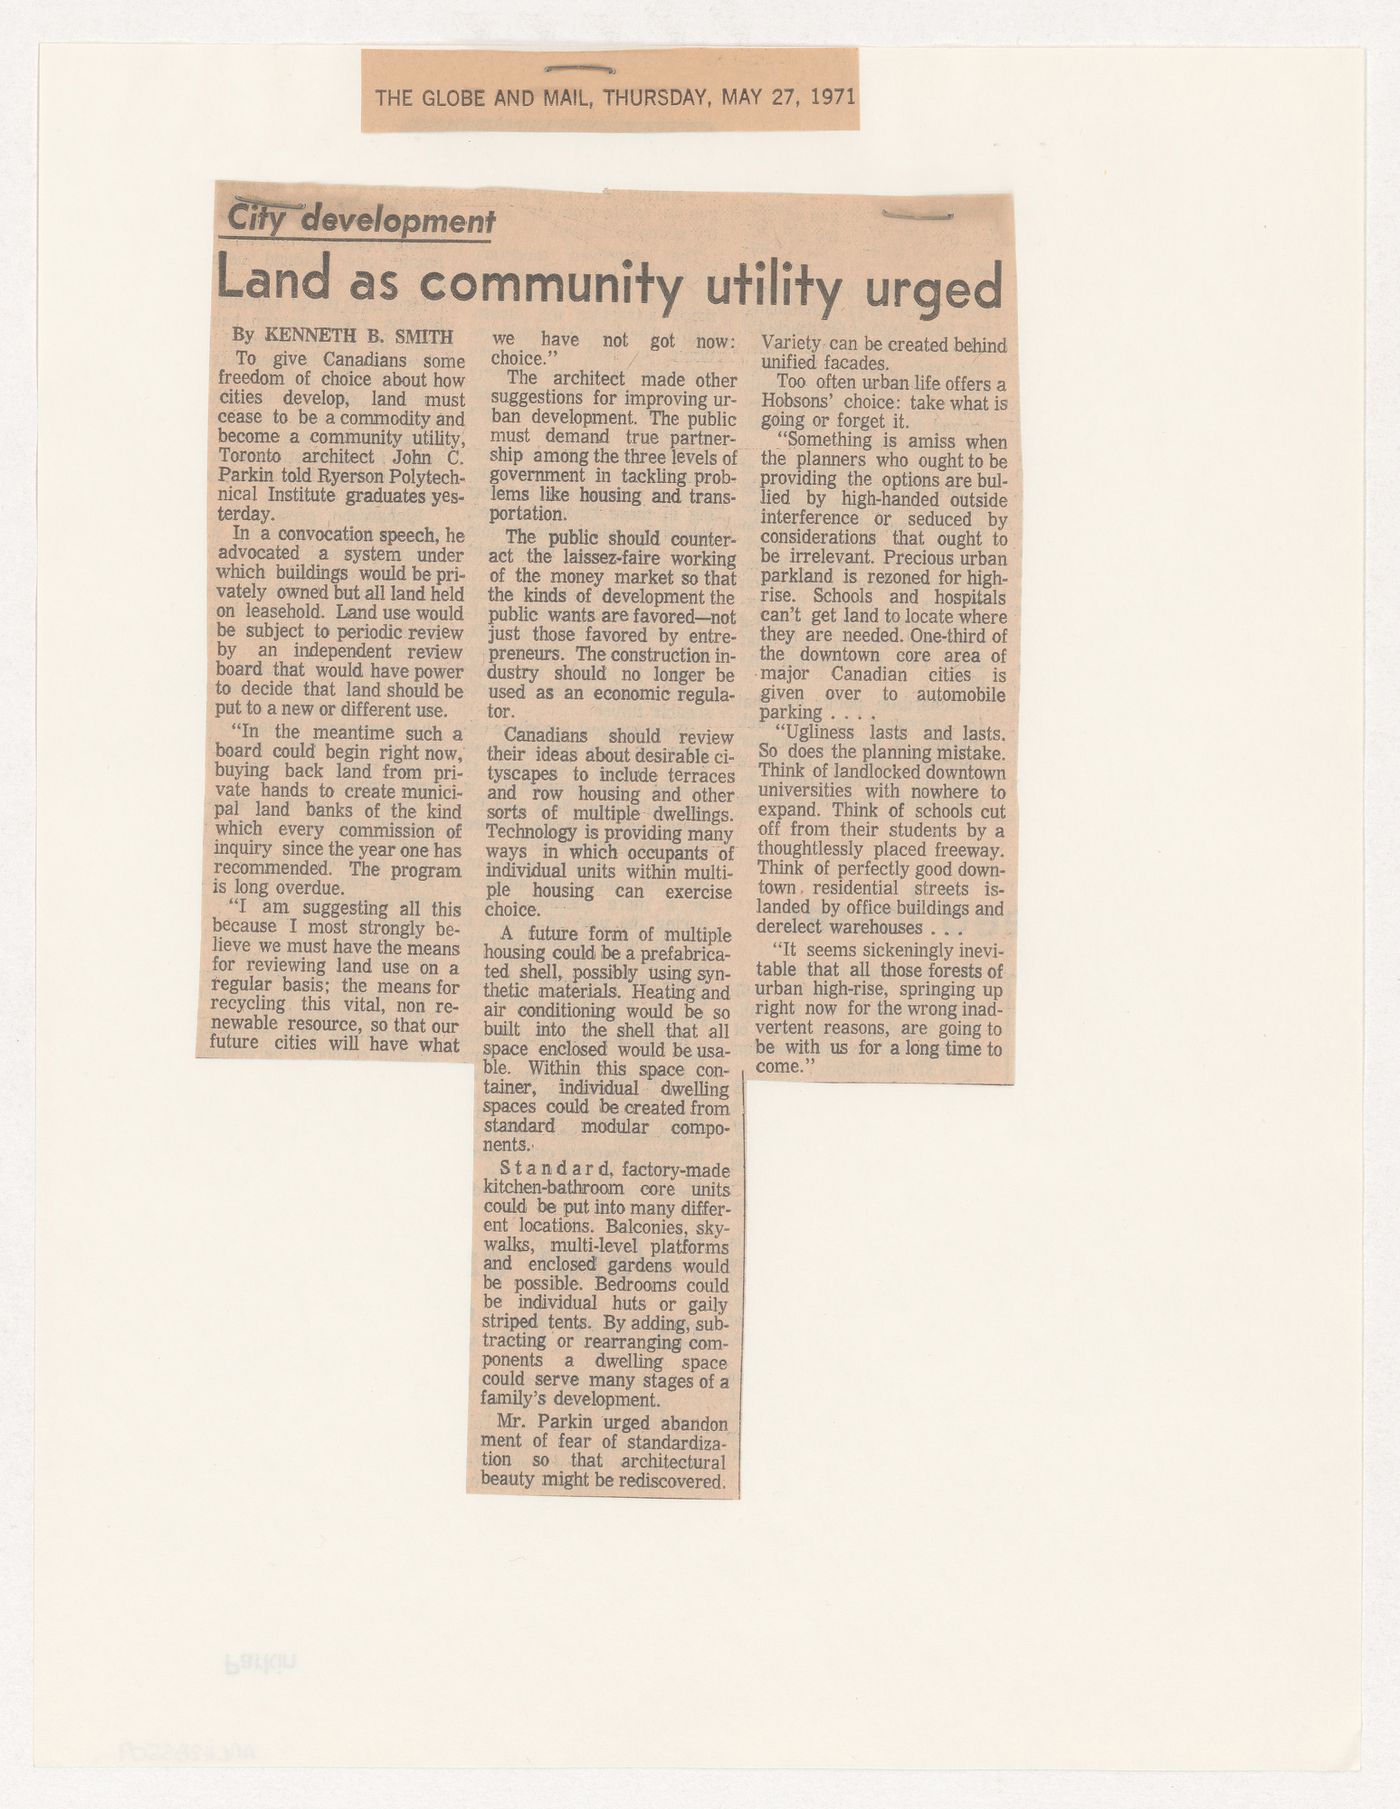 "Land as community utility urged" article published in the Globe and Mail on Parkin's convocation address about property ownership, land use and urban planning